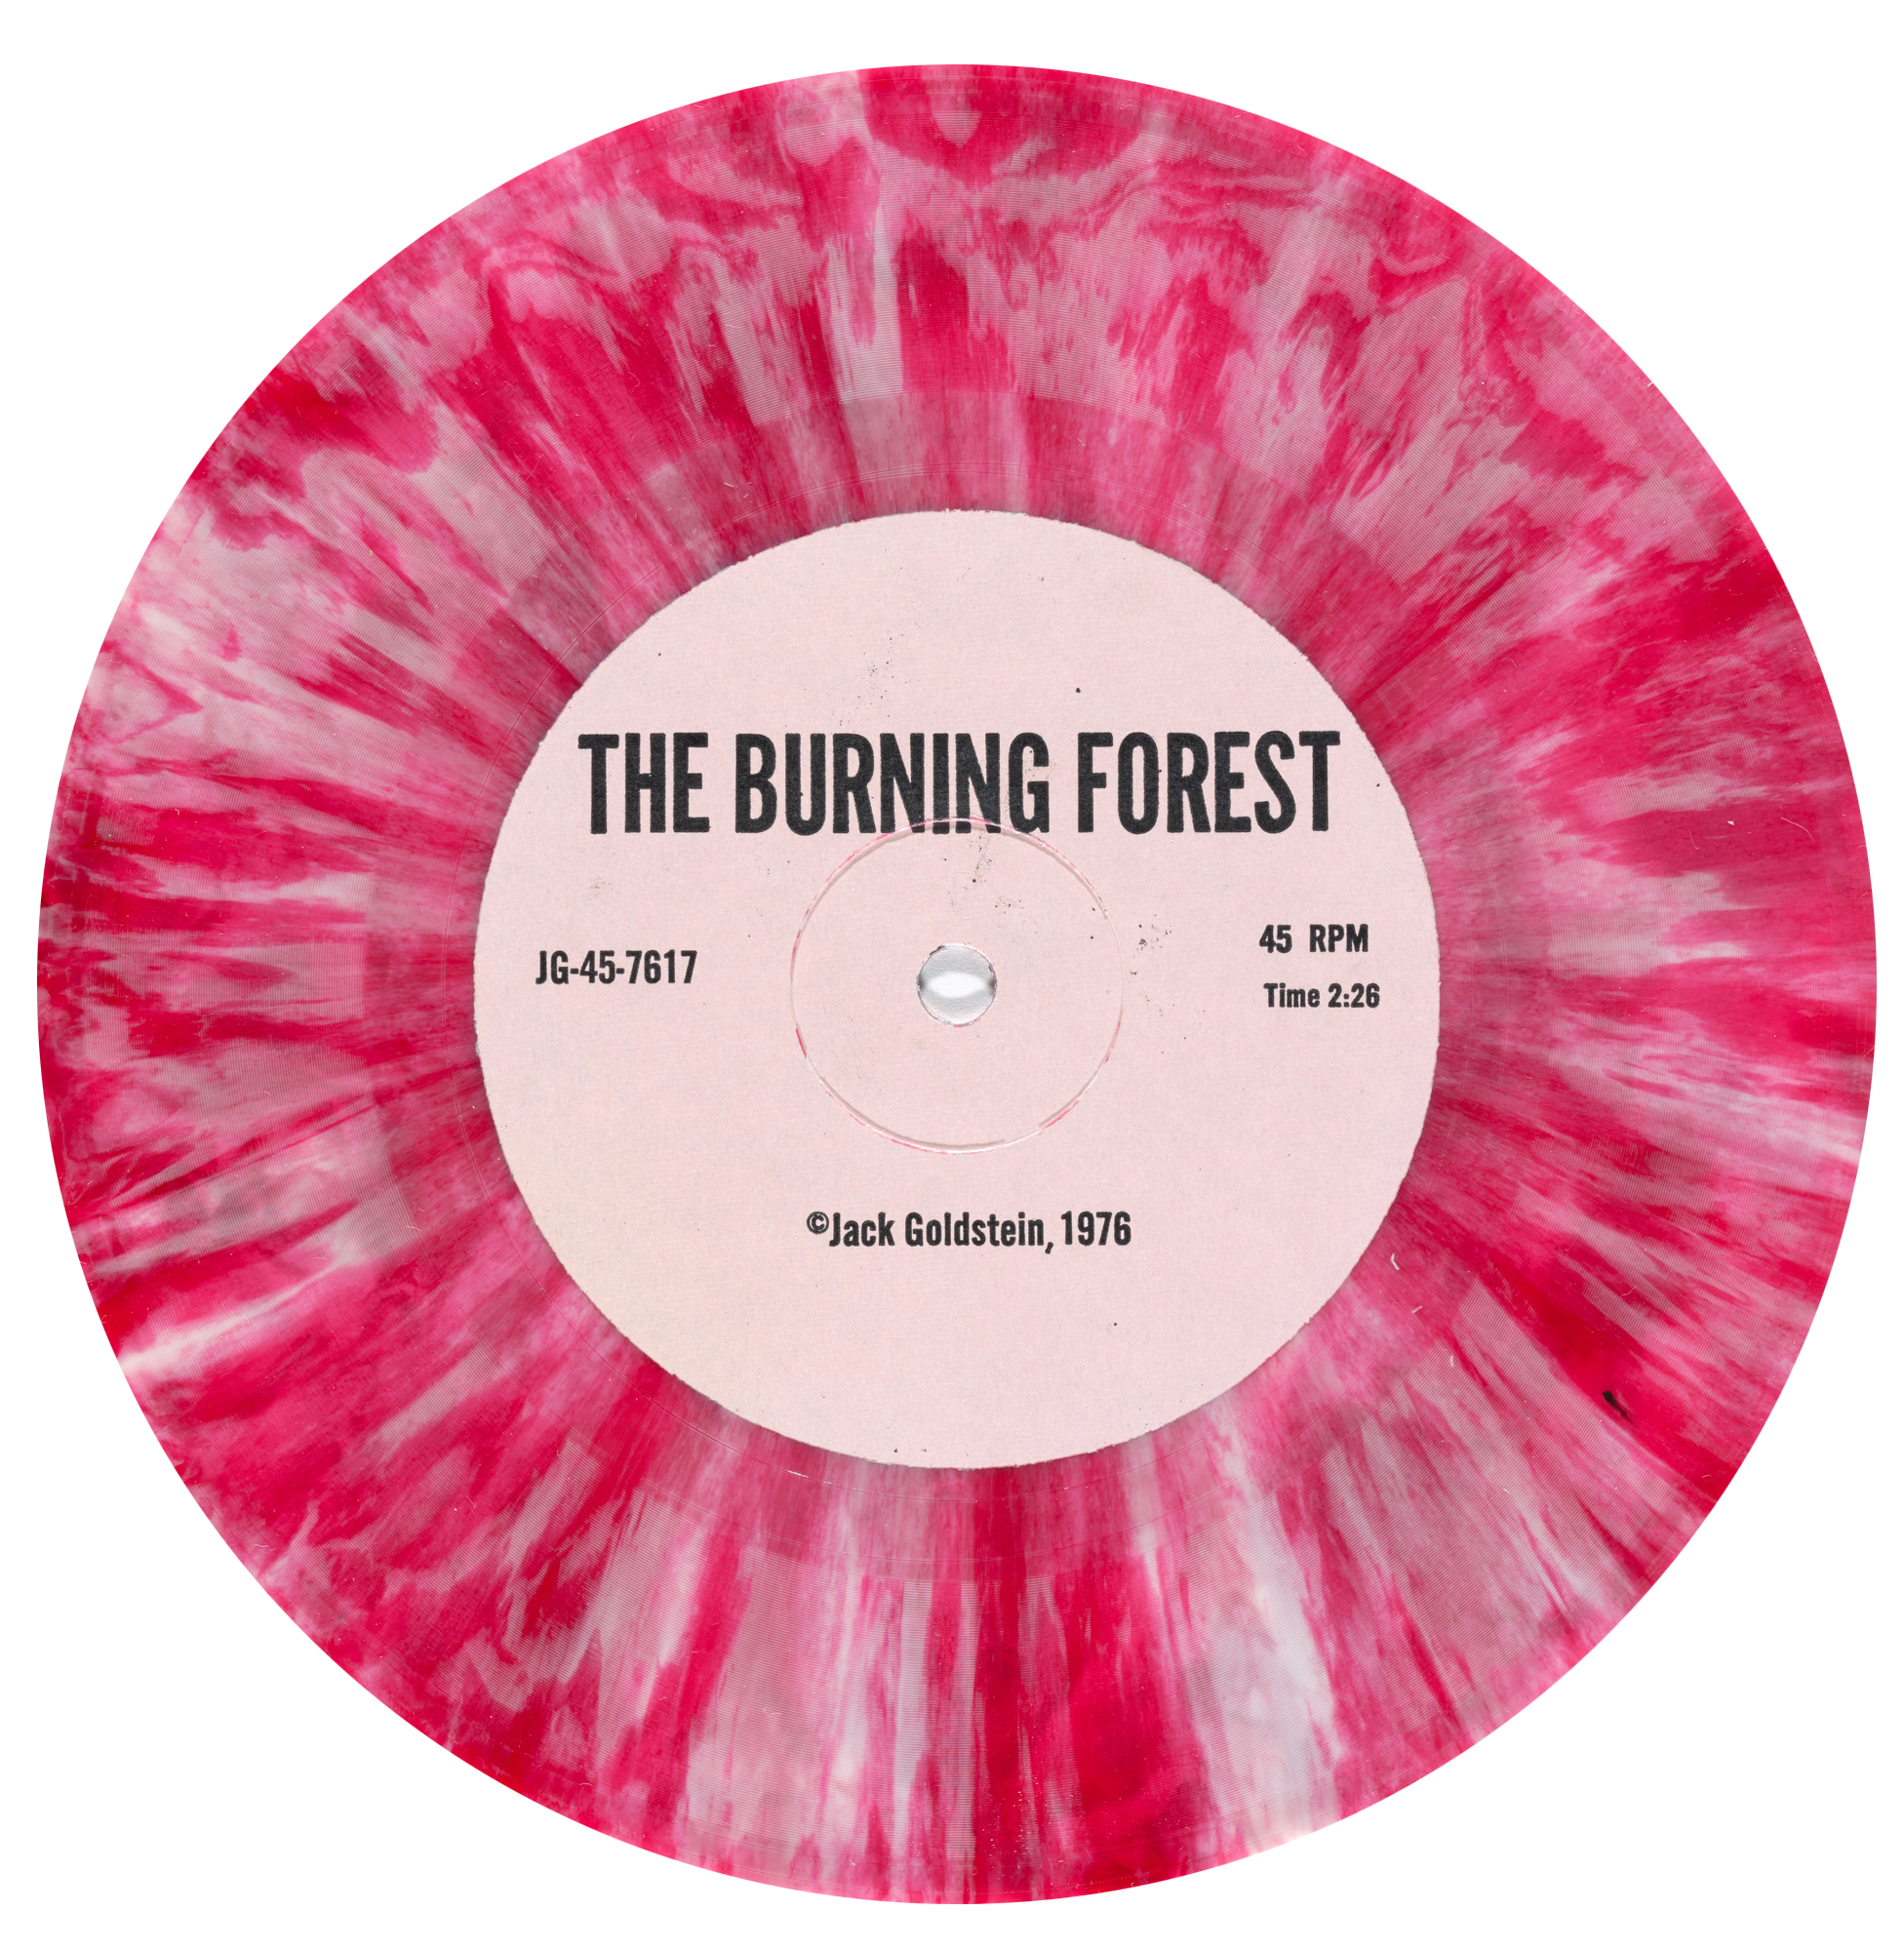  The Burning Forest
Marbled red and white vinyl - 45 rpm 7-inch record

The Burning Forest est un des neuf éléments constitutifs de :
A Suite of Nine 45 rpm 7-Inch Records with Sound Effects
1976